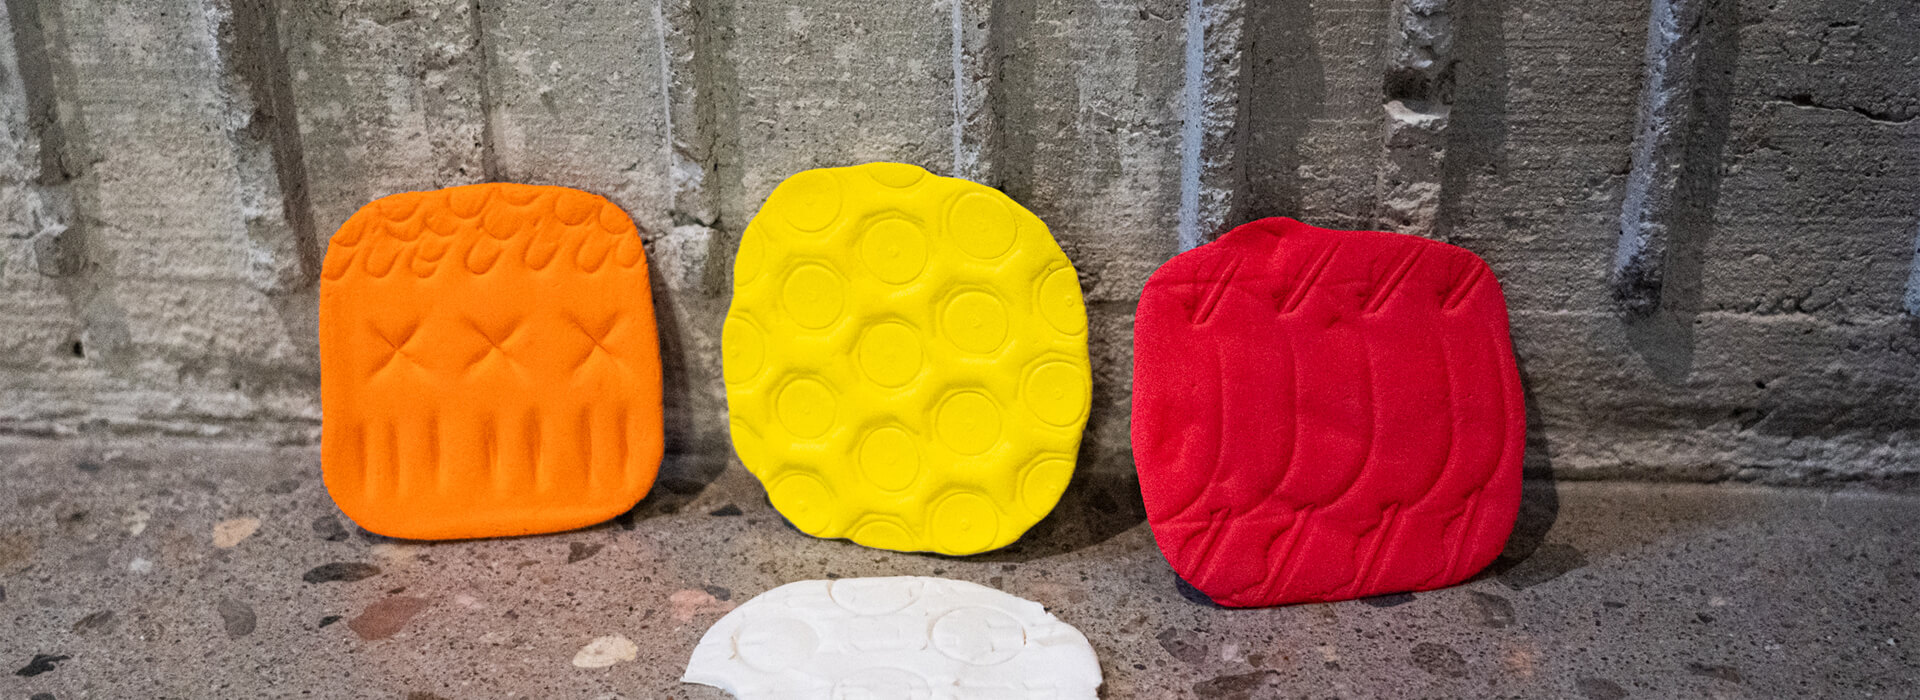 Orange, yellow, red, and white clay patterns lean up against textured concrete